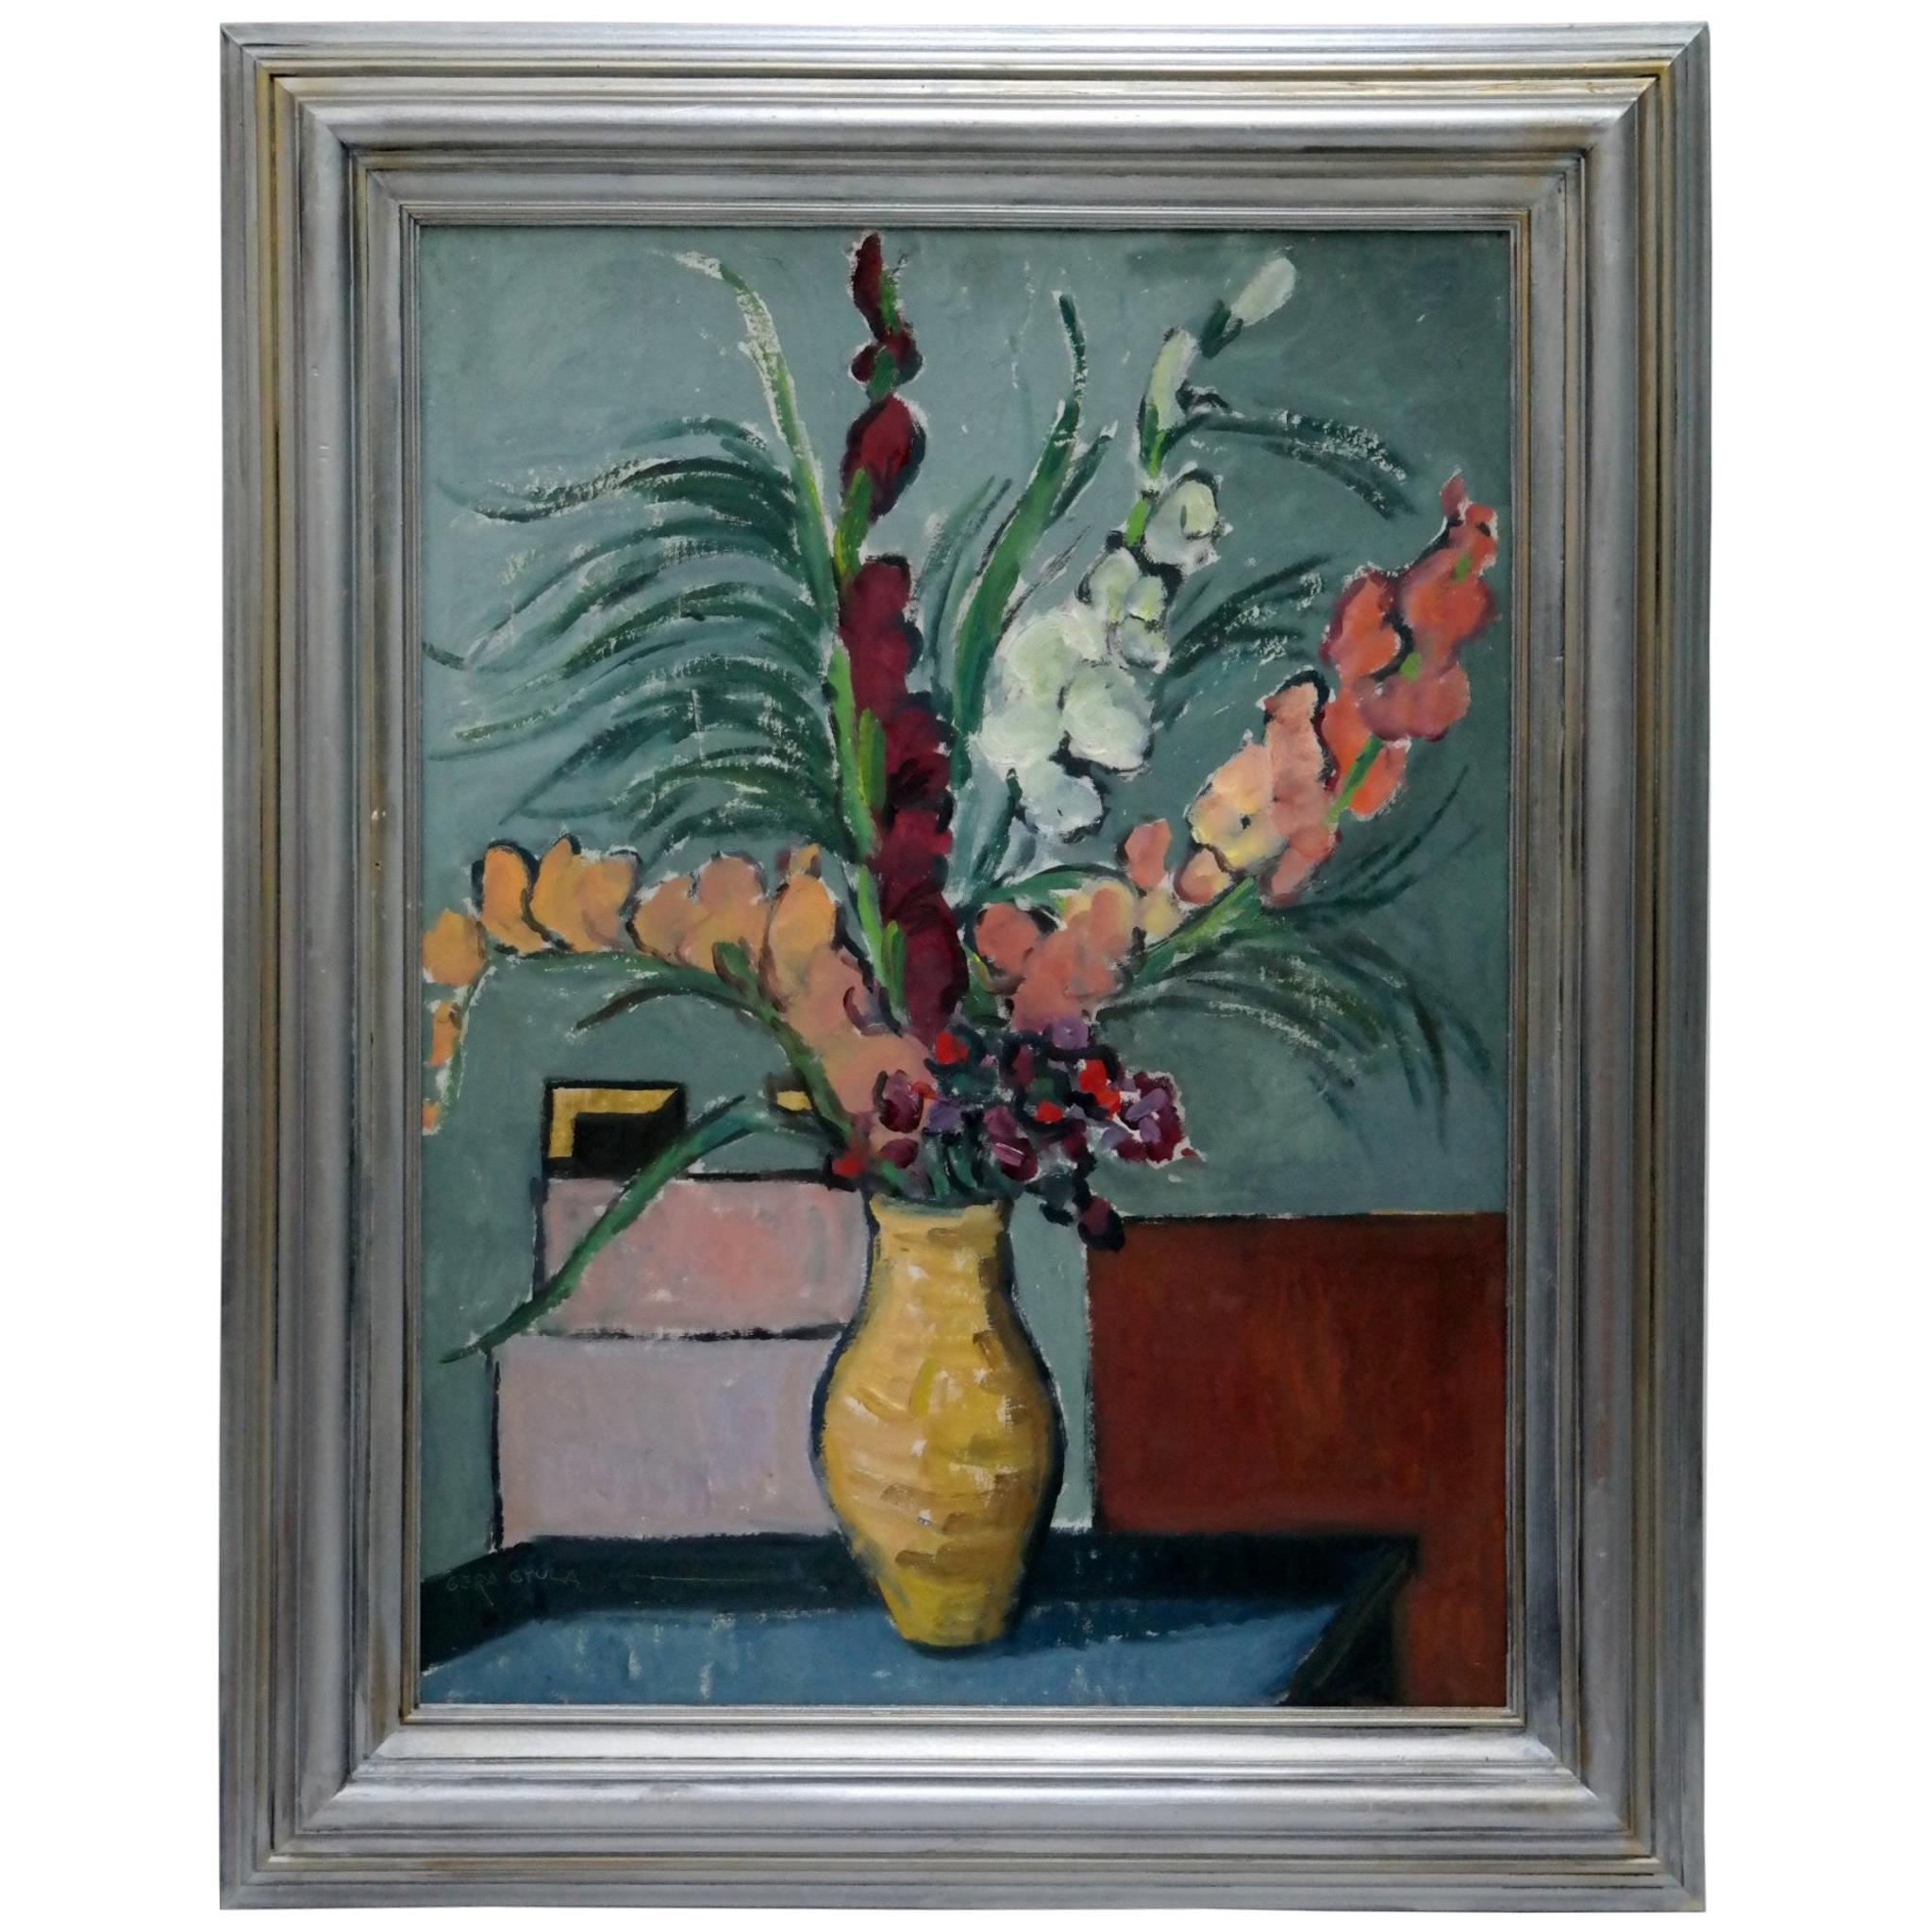 Flower Still Life Oil Painting by the Hungarian Gera Gyula